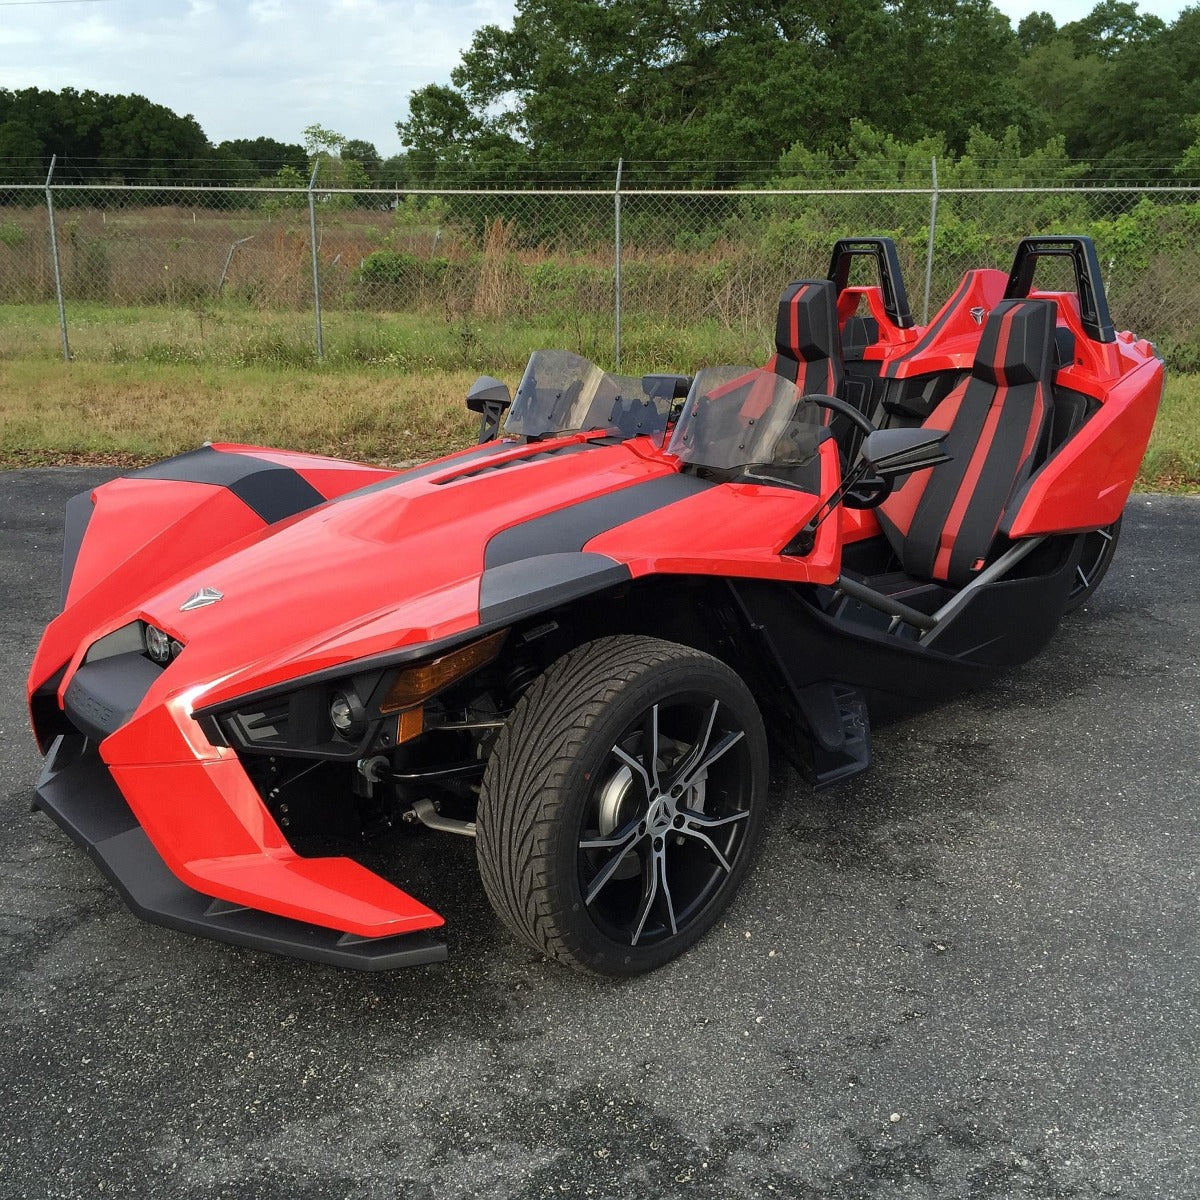 MADSTAD ENGINEERING 12" DUAL DOUBLE BUBBLE WINDSHIELD SYSTEM FOR THE POLARIS SLINGSHOT (2015-2019)